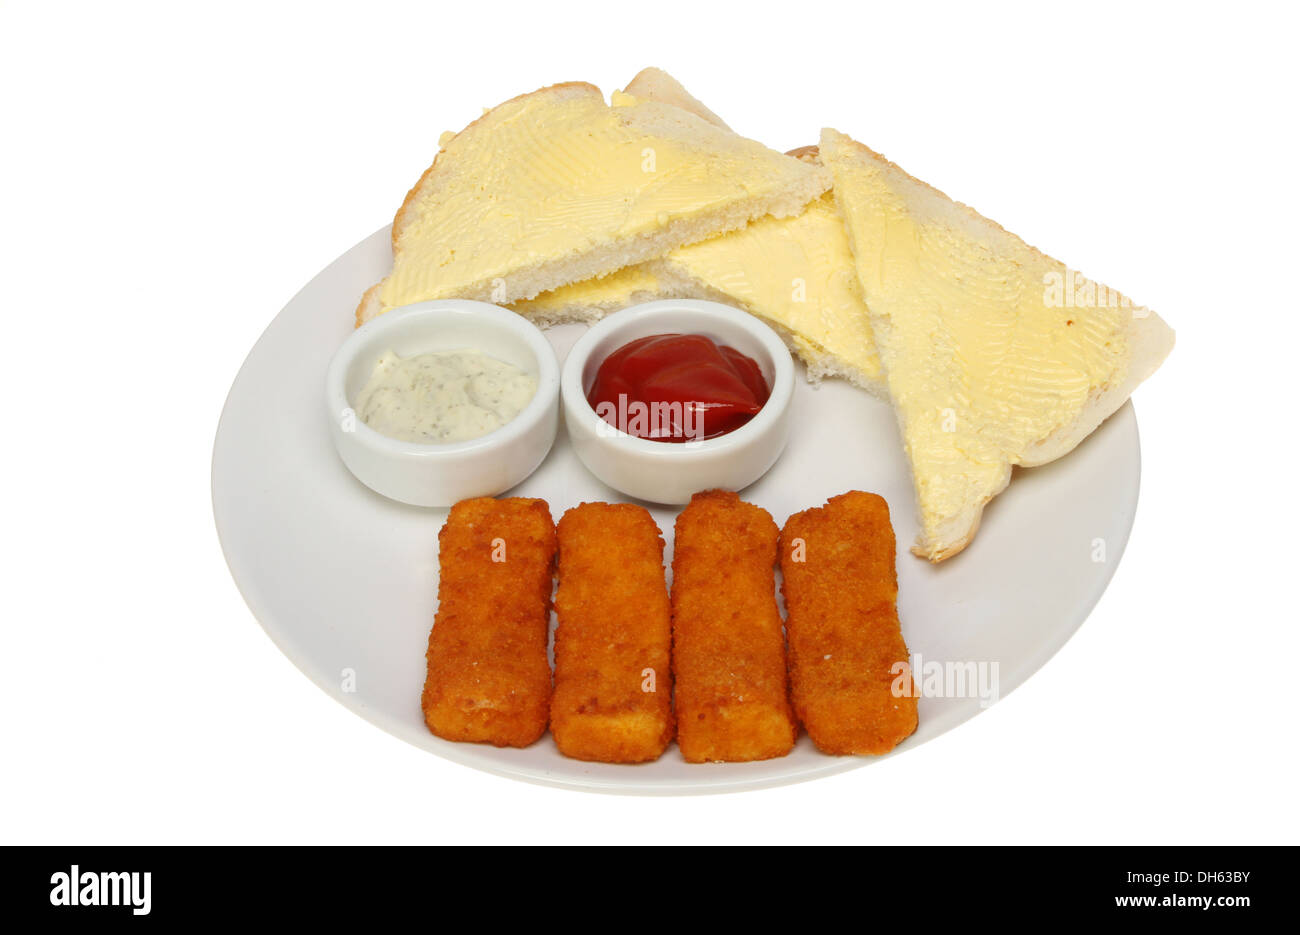 Fish fingers bread and butter with tartar sauce and tomato ketchup